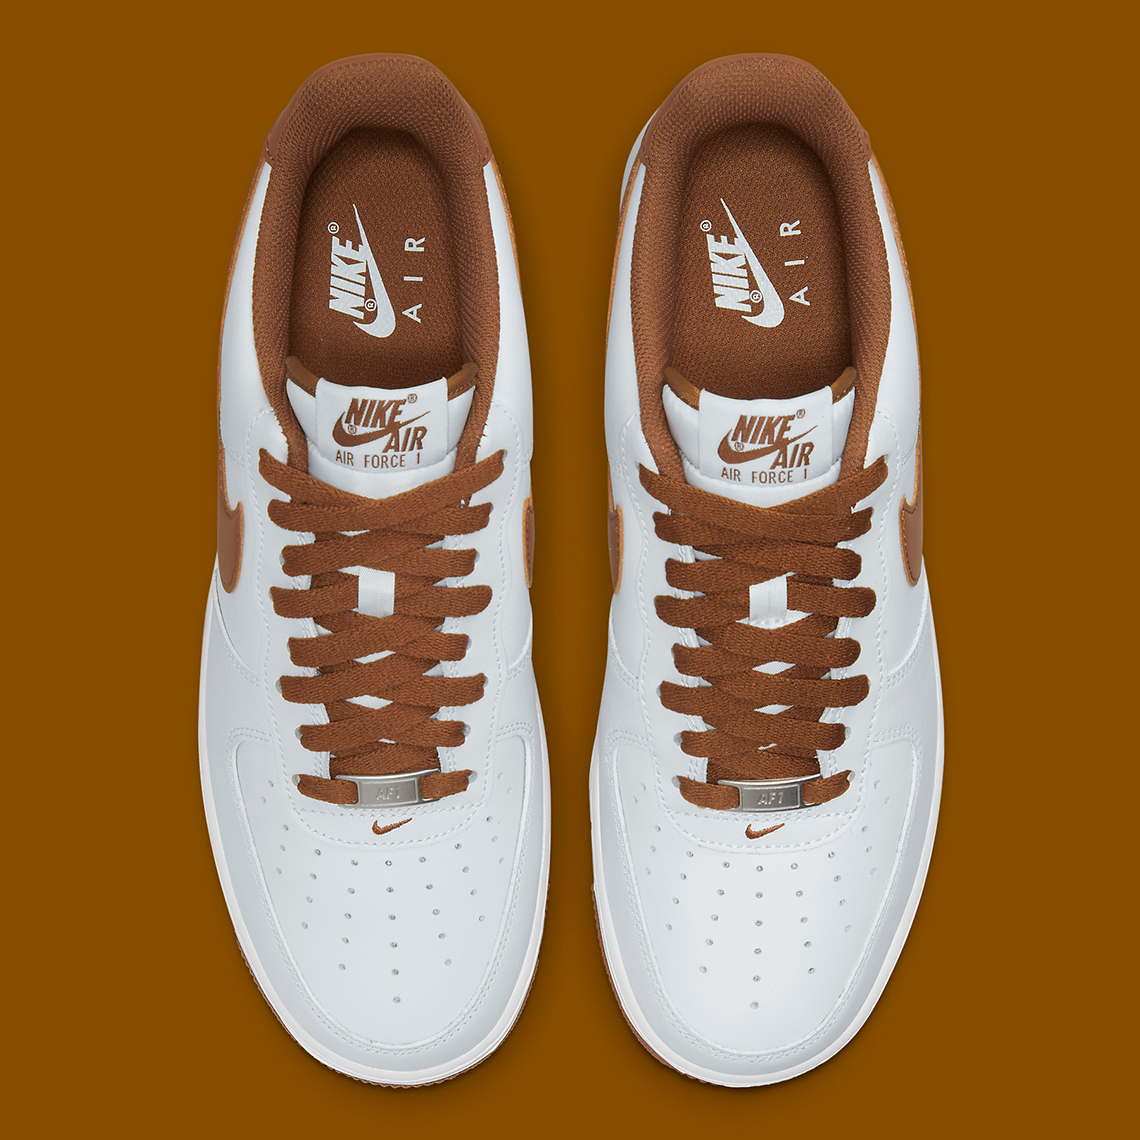 nike air force 1 low white pecan DH7561 100 release date 7